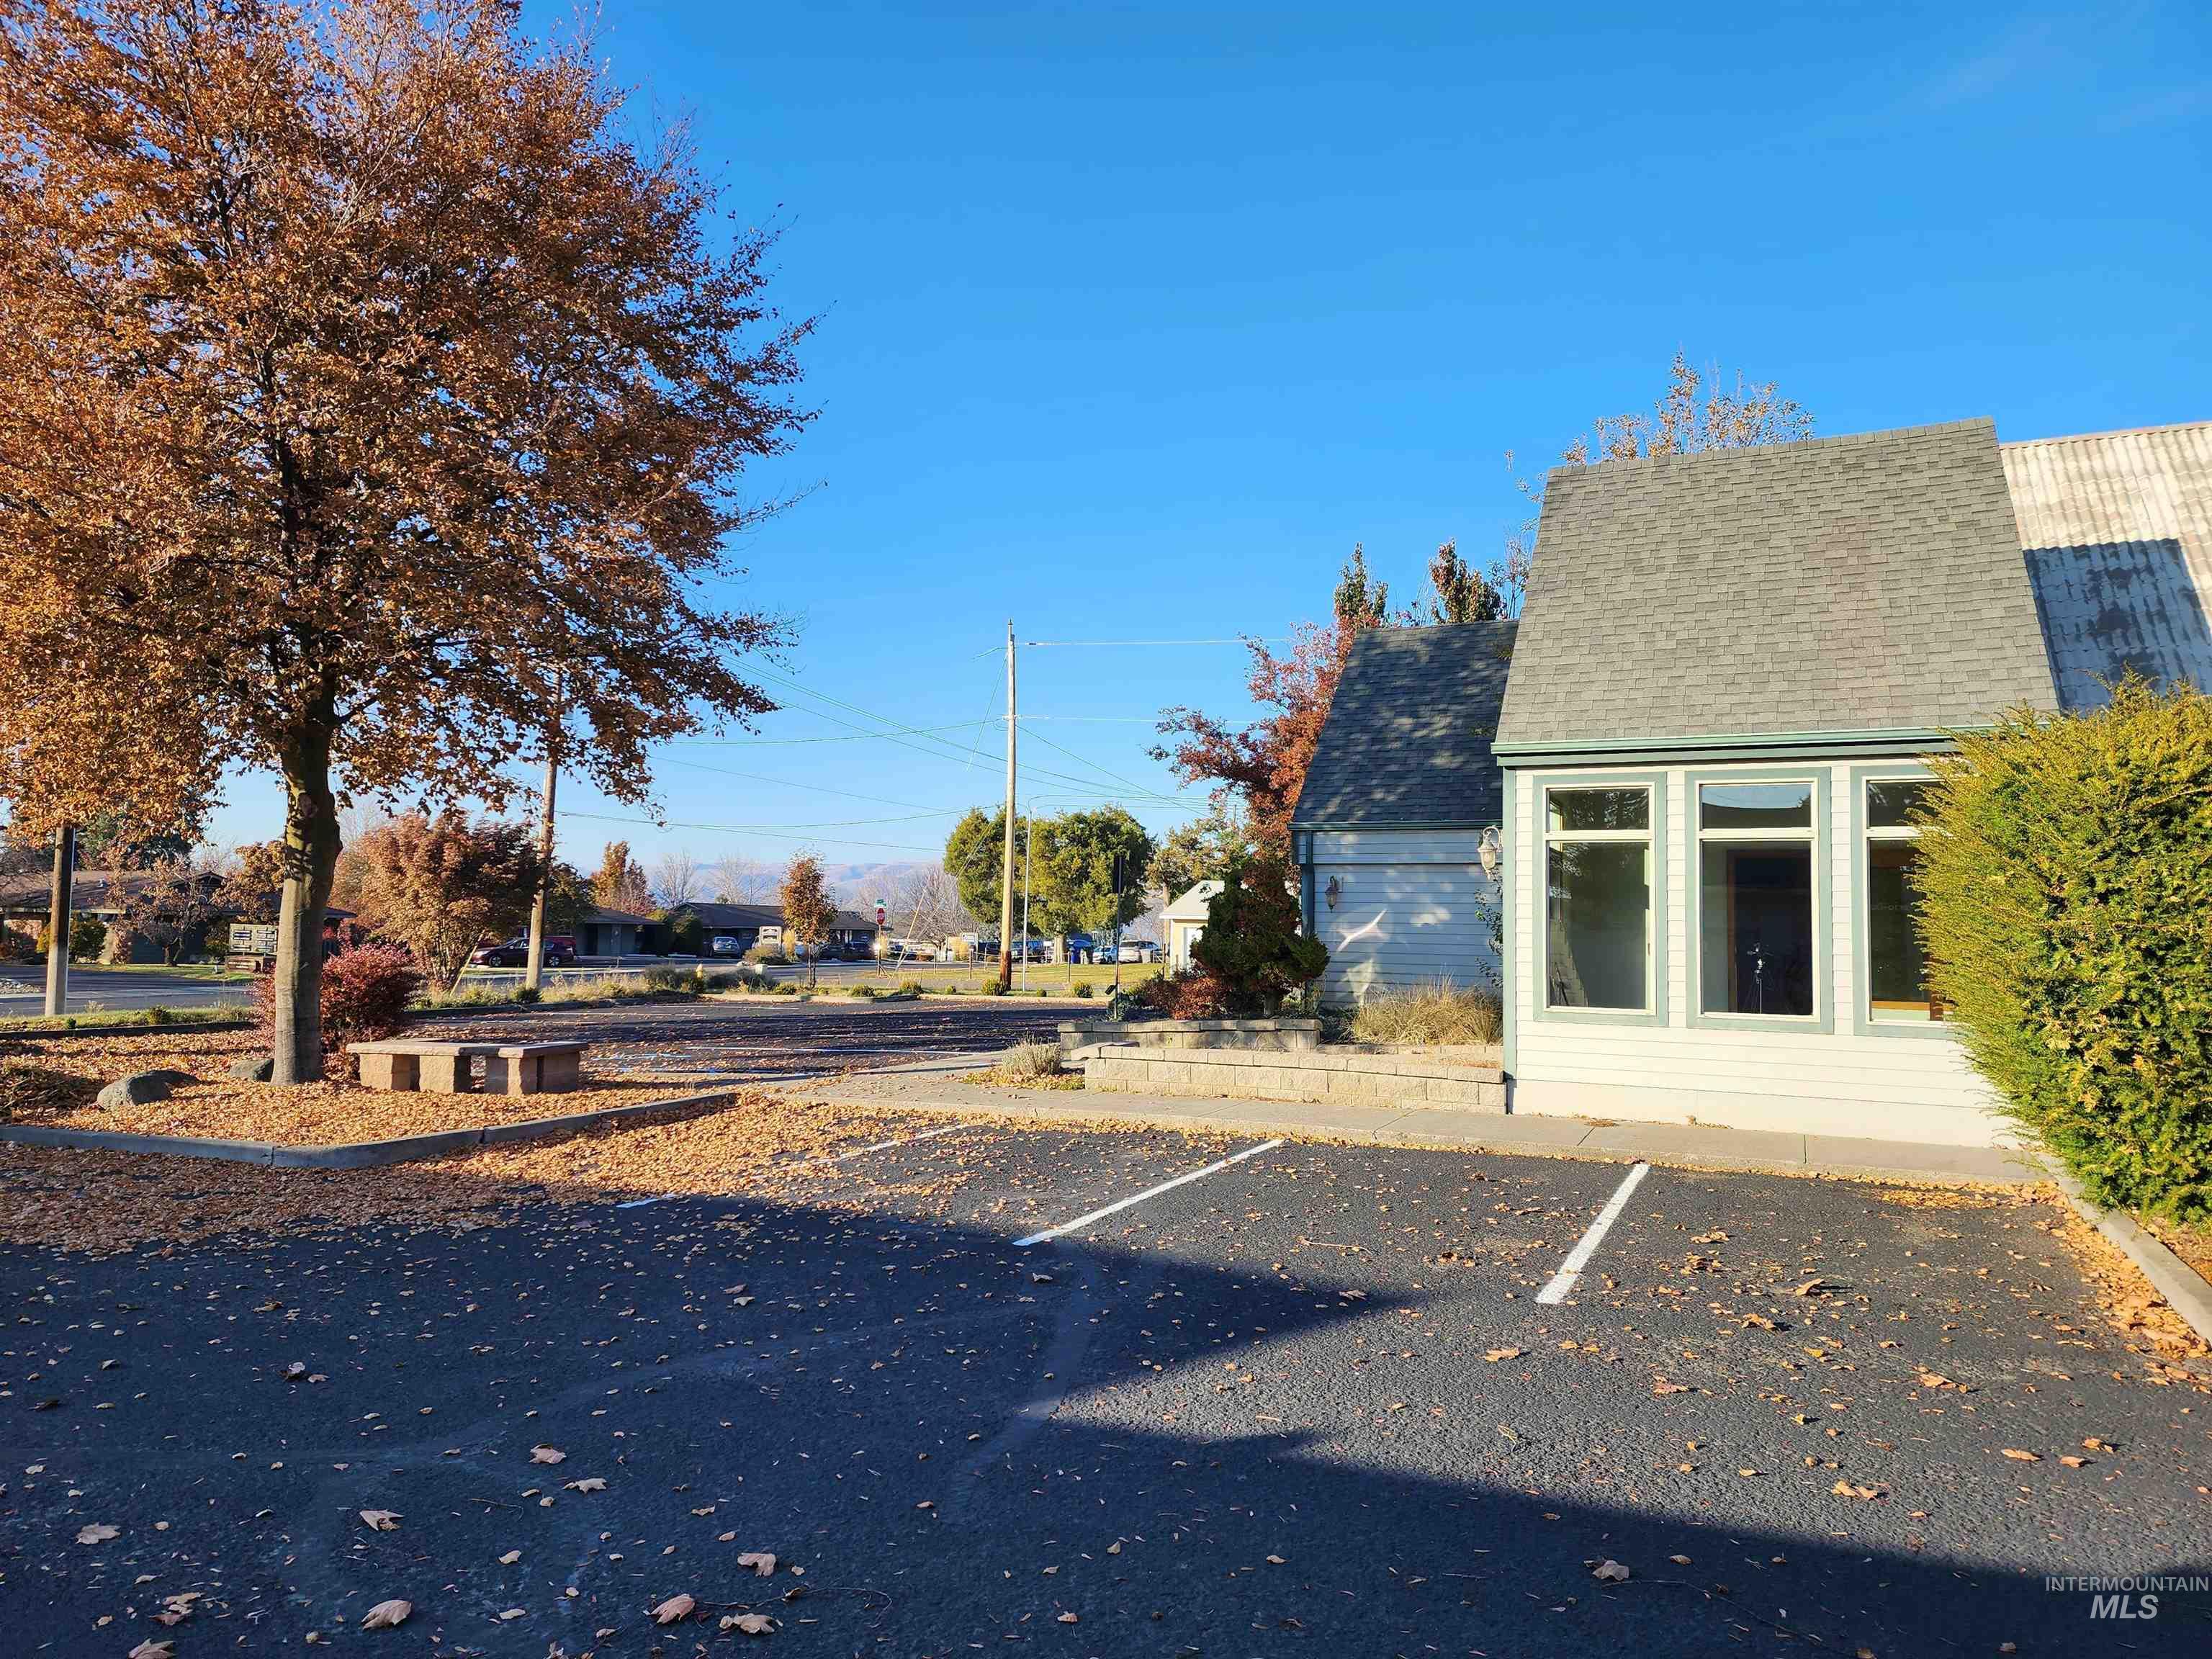 3323 4th St., Lewiston, Idaho 83501, Business/Commercial For Sale, Price $610,000,MLS 98913736